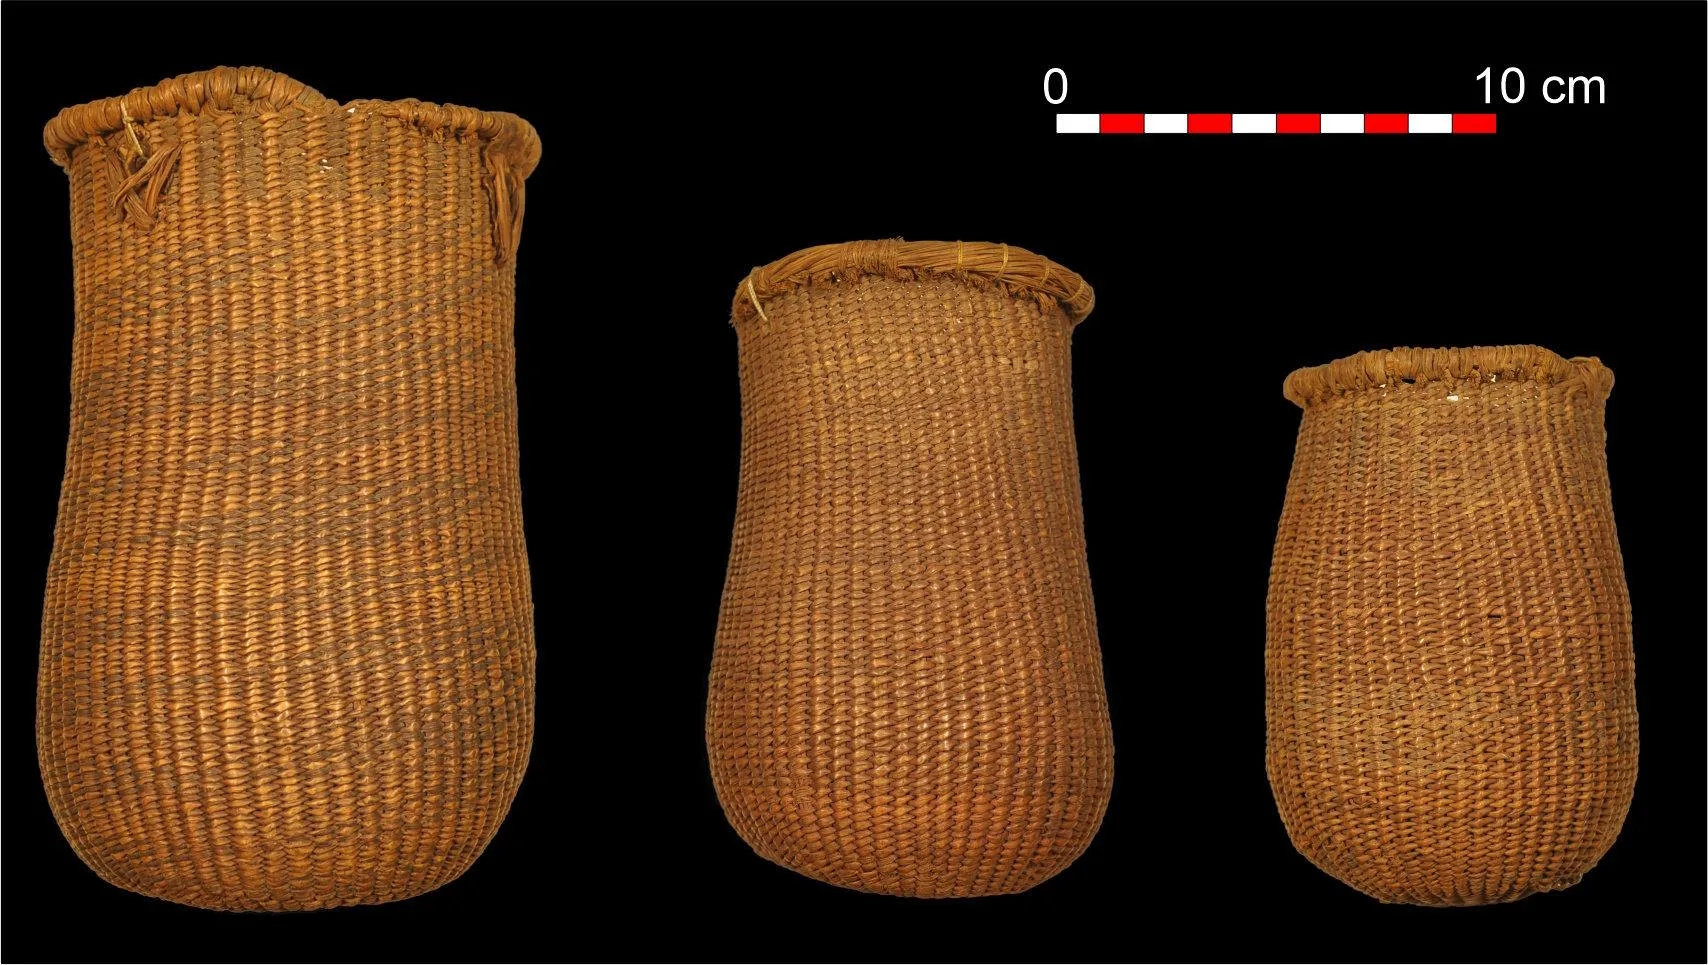 Oldest baskets in Europe found in Spanish cave